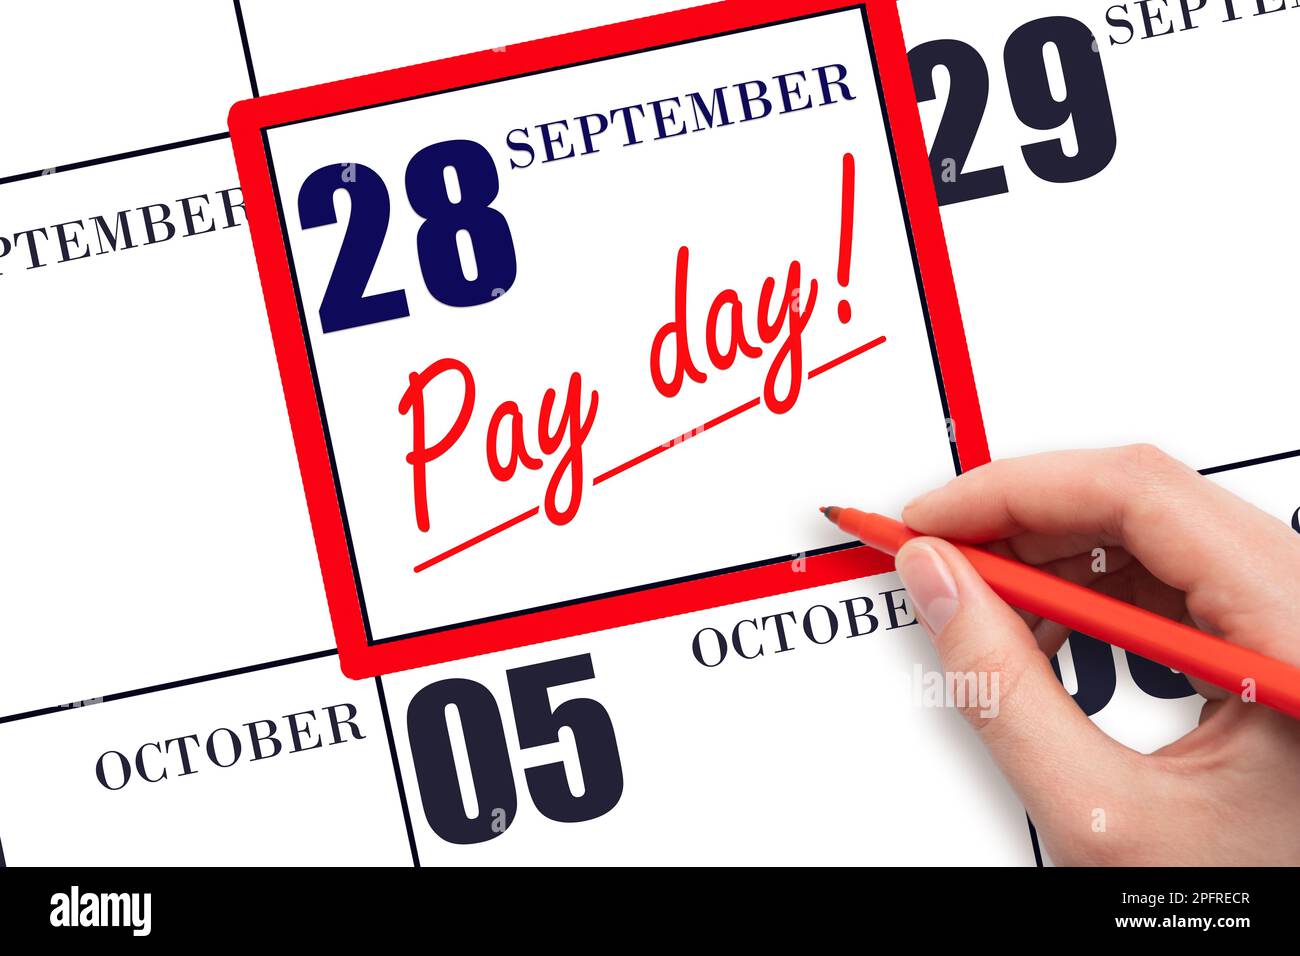 28th day of September. Hand writing text PAY DATE on calendar date September  28 and underline it. Payment due date.  Reminder concept of payment. Aut Stock Photo